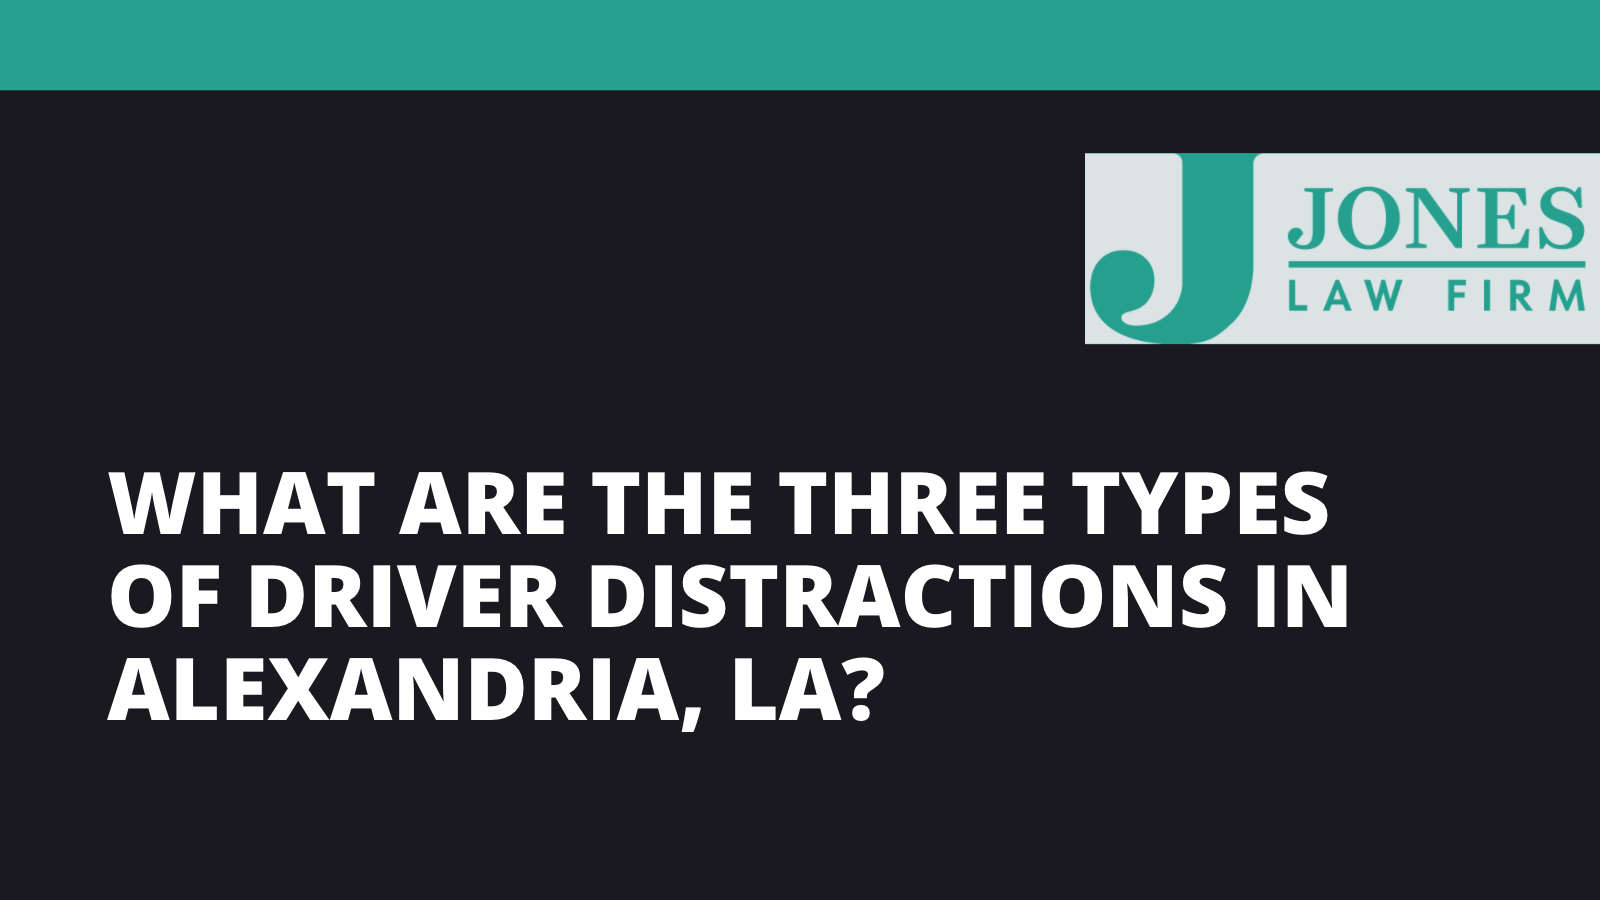 What are the Three Types of Driver Distractions in Alexandria la - Jones law firm - Alexandria louisiana